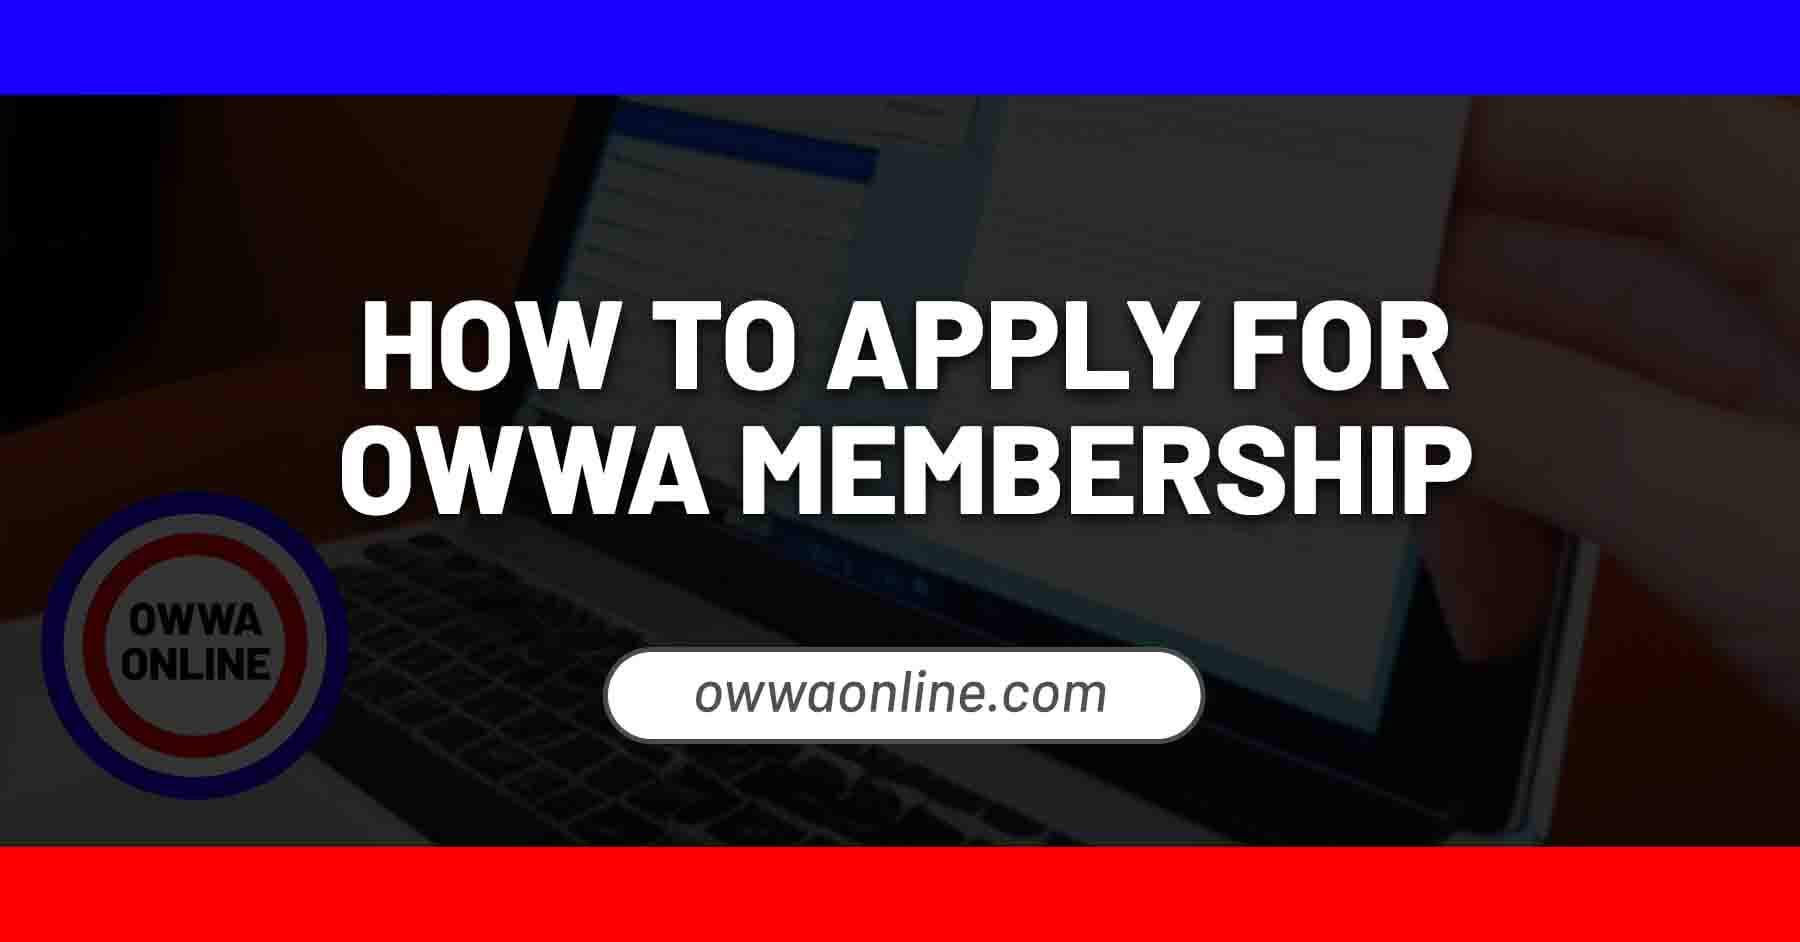 how to apply for owwa membership online